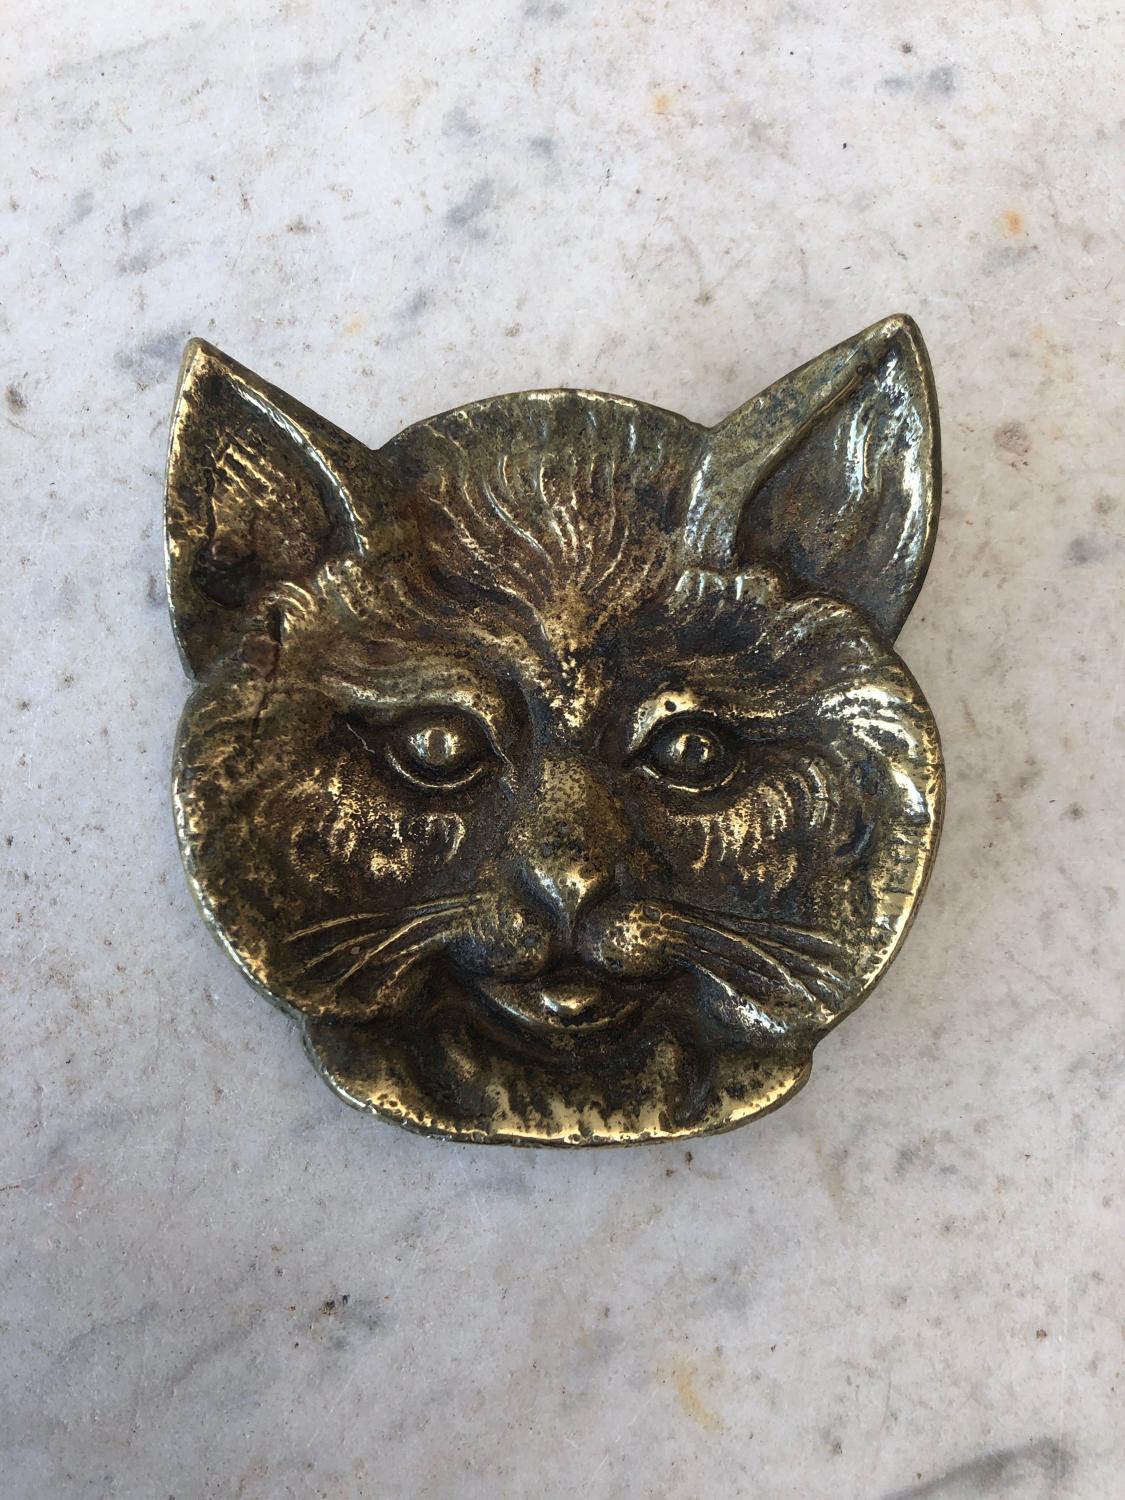 C1930/40s Brass Pin or Change Tray Shaped as a Cat